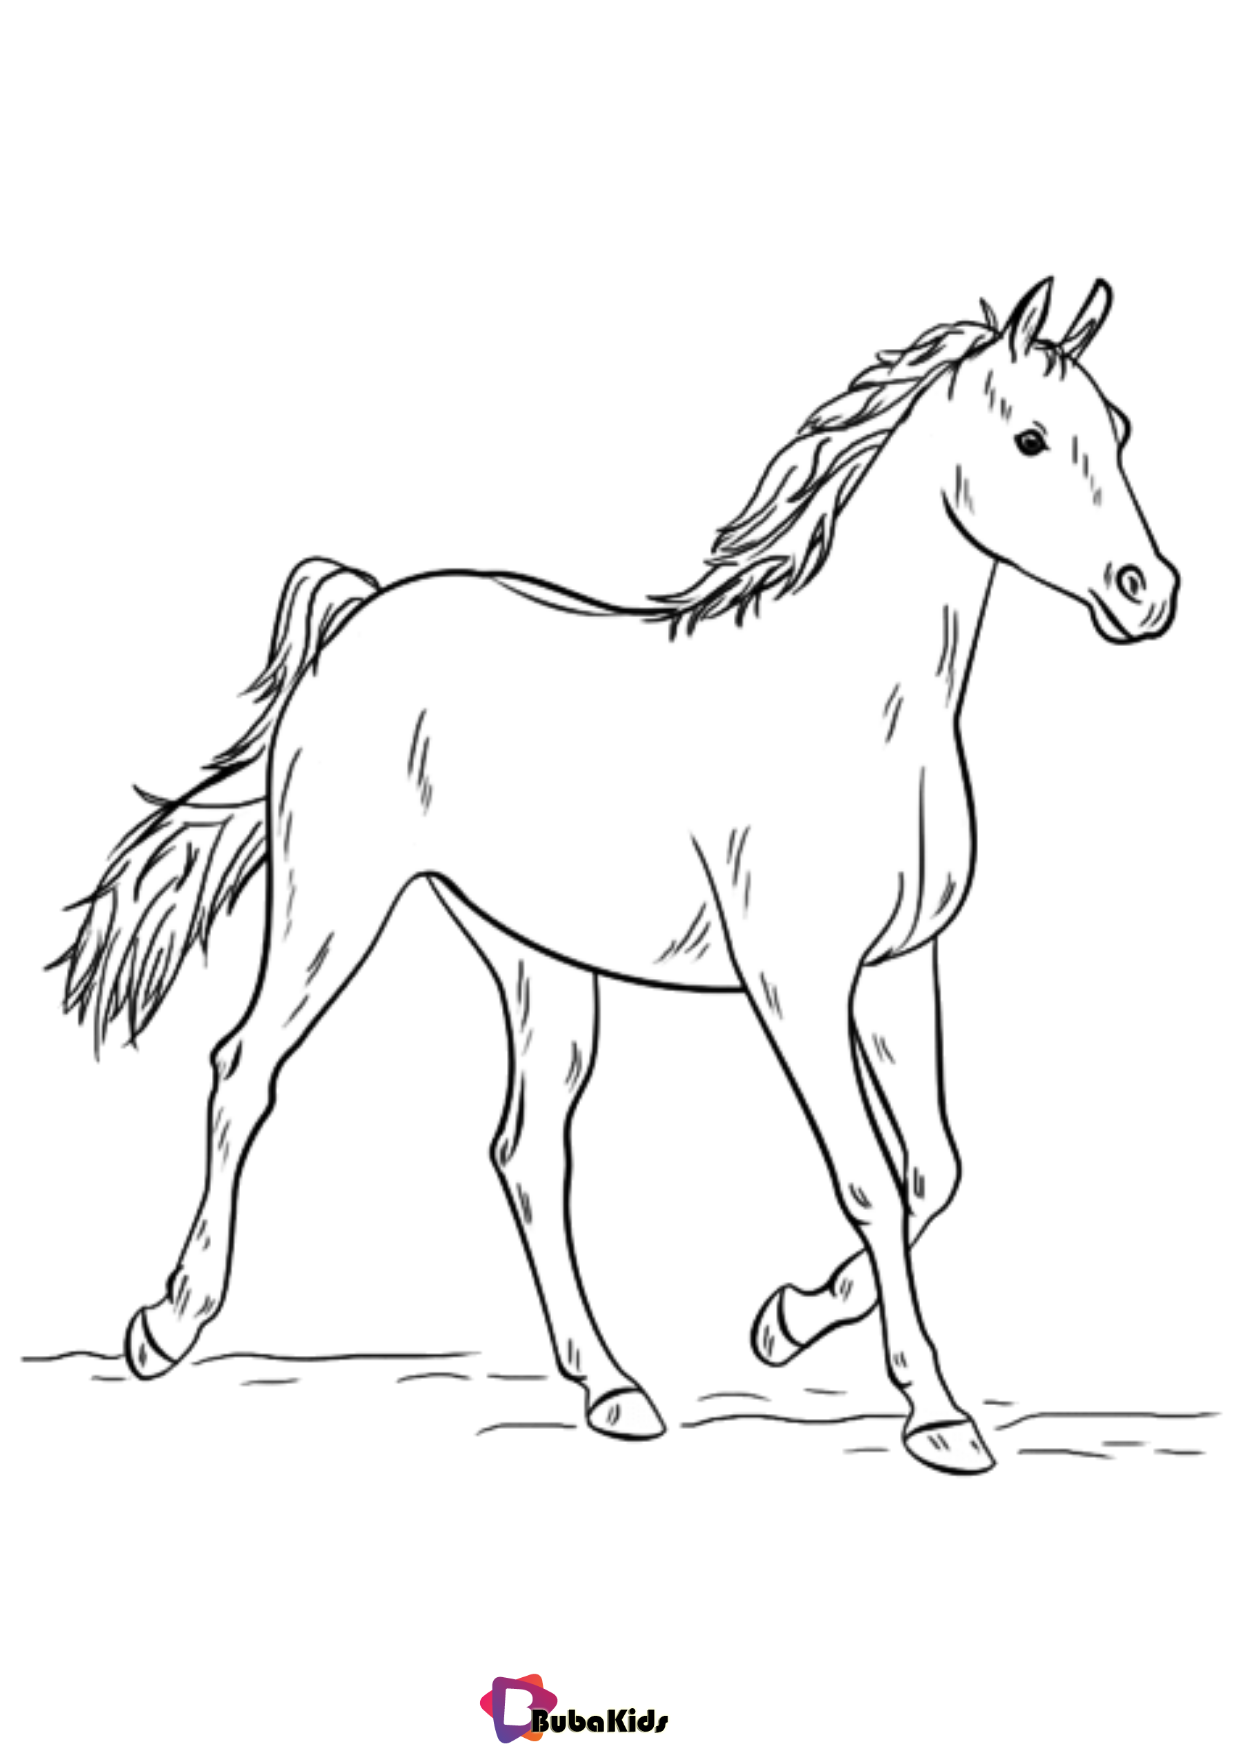 Animal coloring pages Horse coloring pages Wallpaper